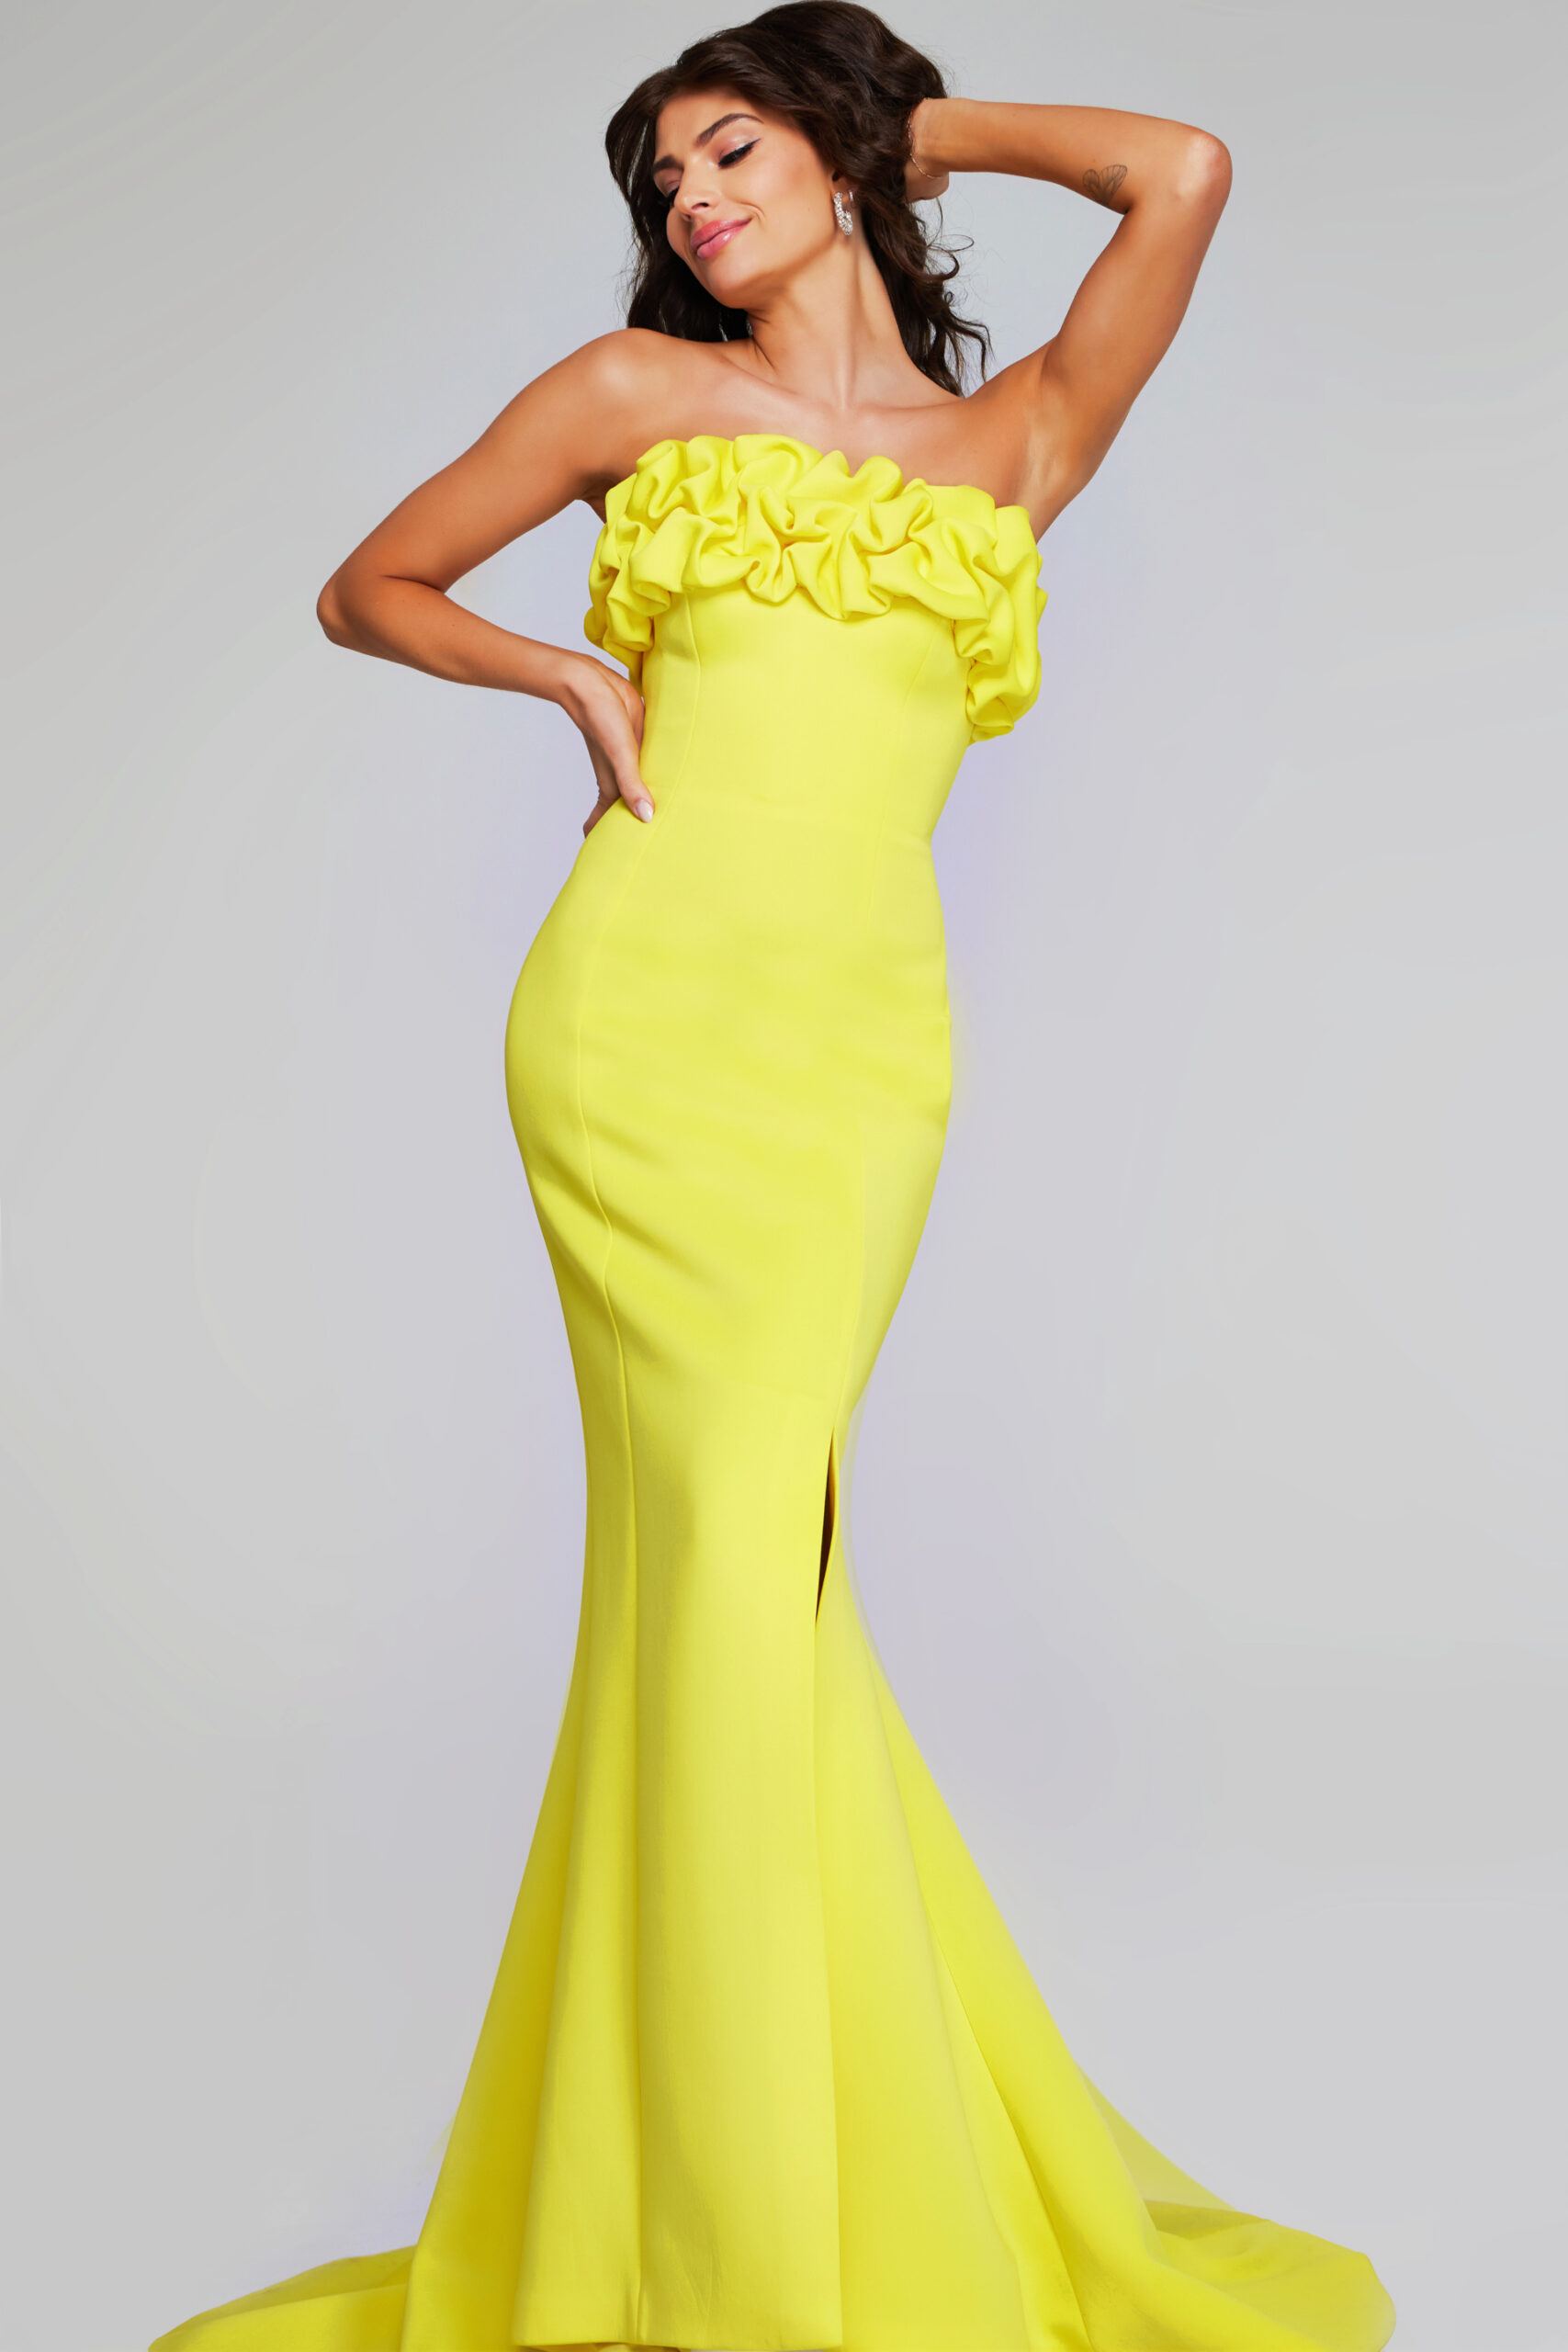 Model wearing Stunning Strapless Yellow Gown with Ruffled Bodice 38922